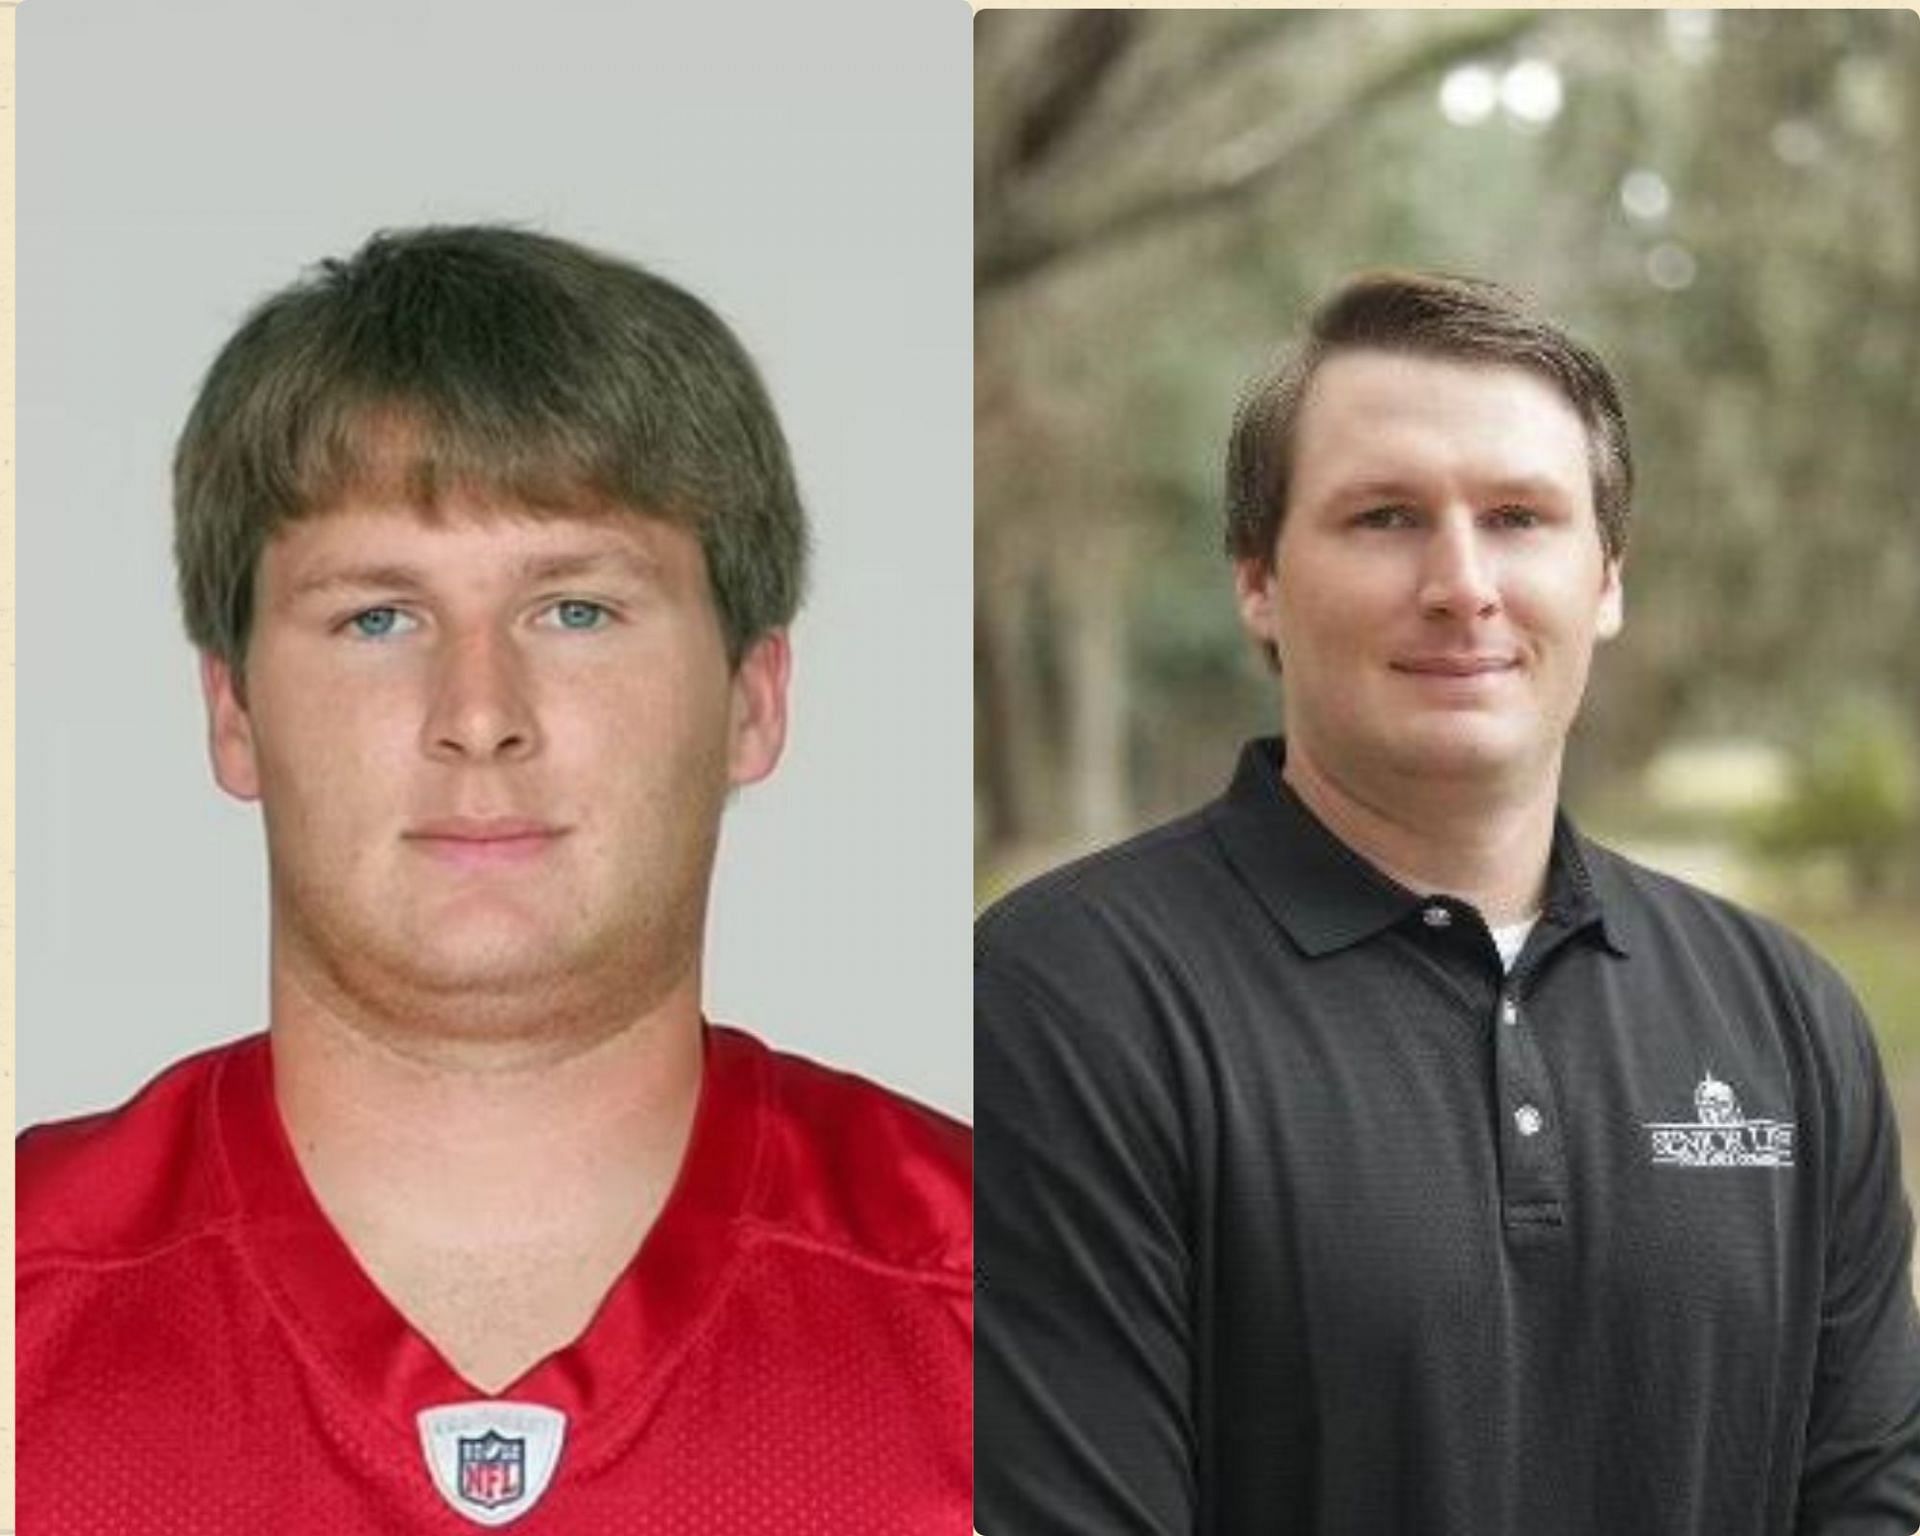 Now an insurance executive, Shiver was a walk-on long snapper for the Auburn Tigers 